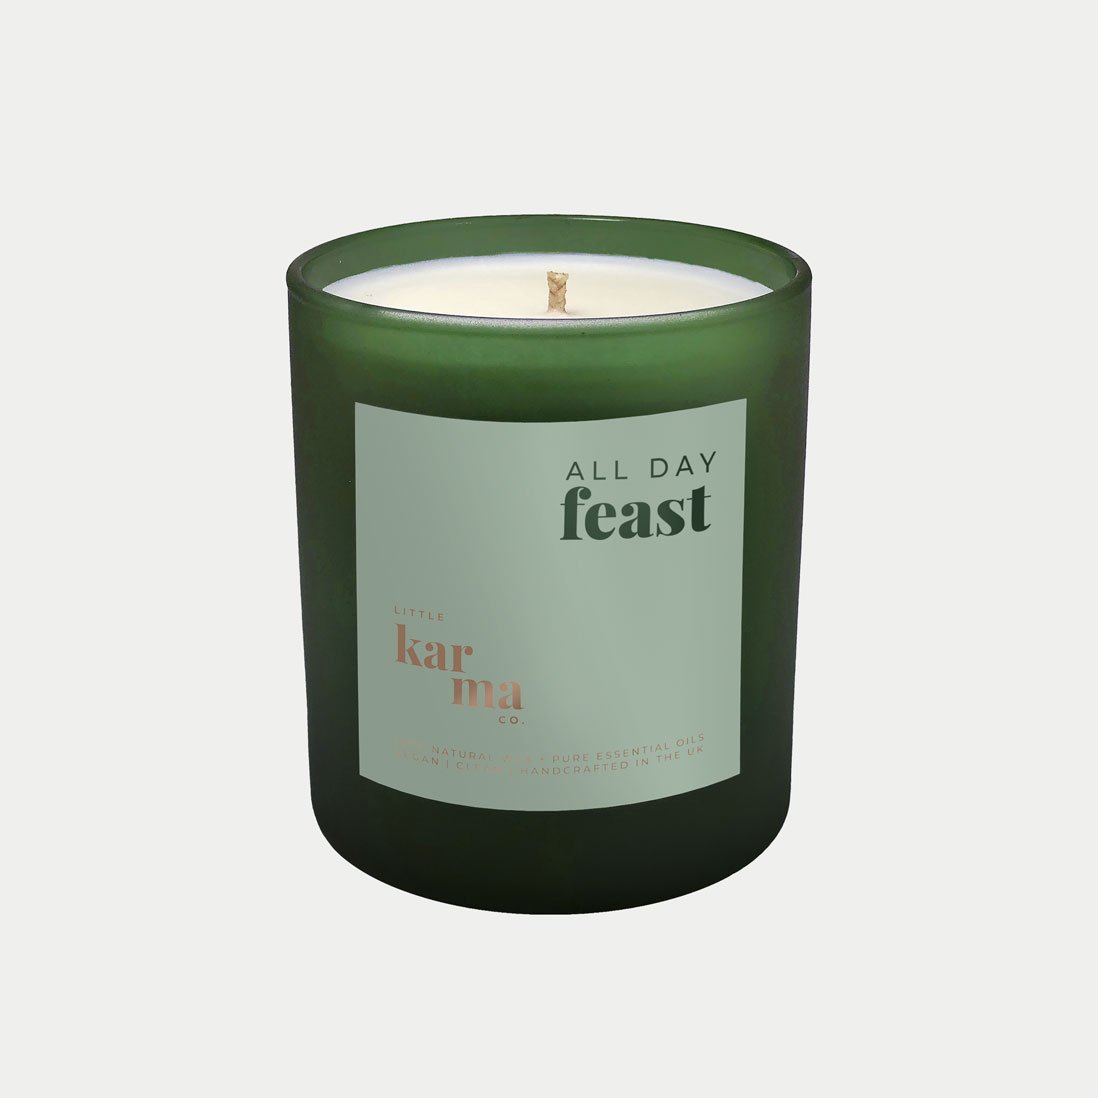 All Day Feast sweet cinnamon refillable Christmas candle